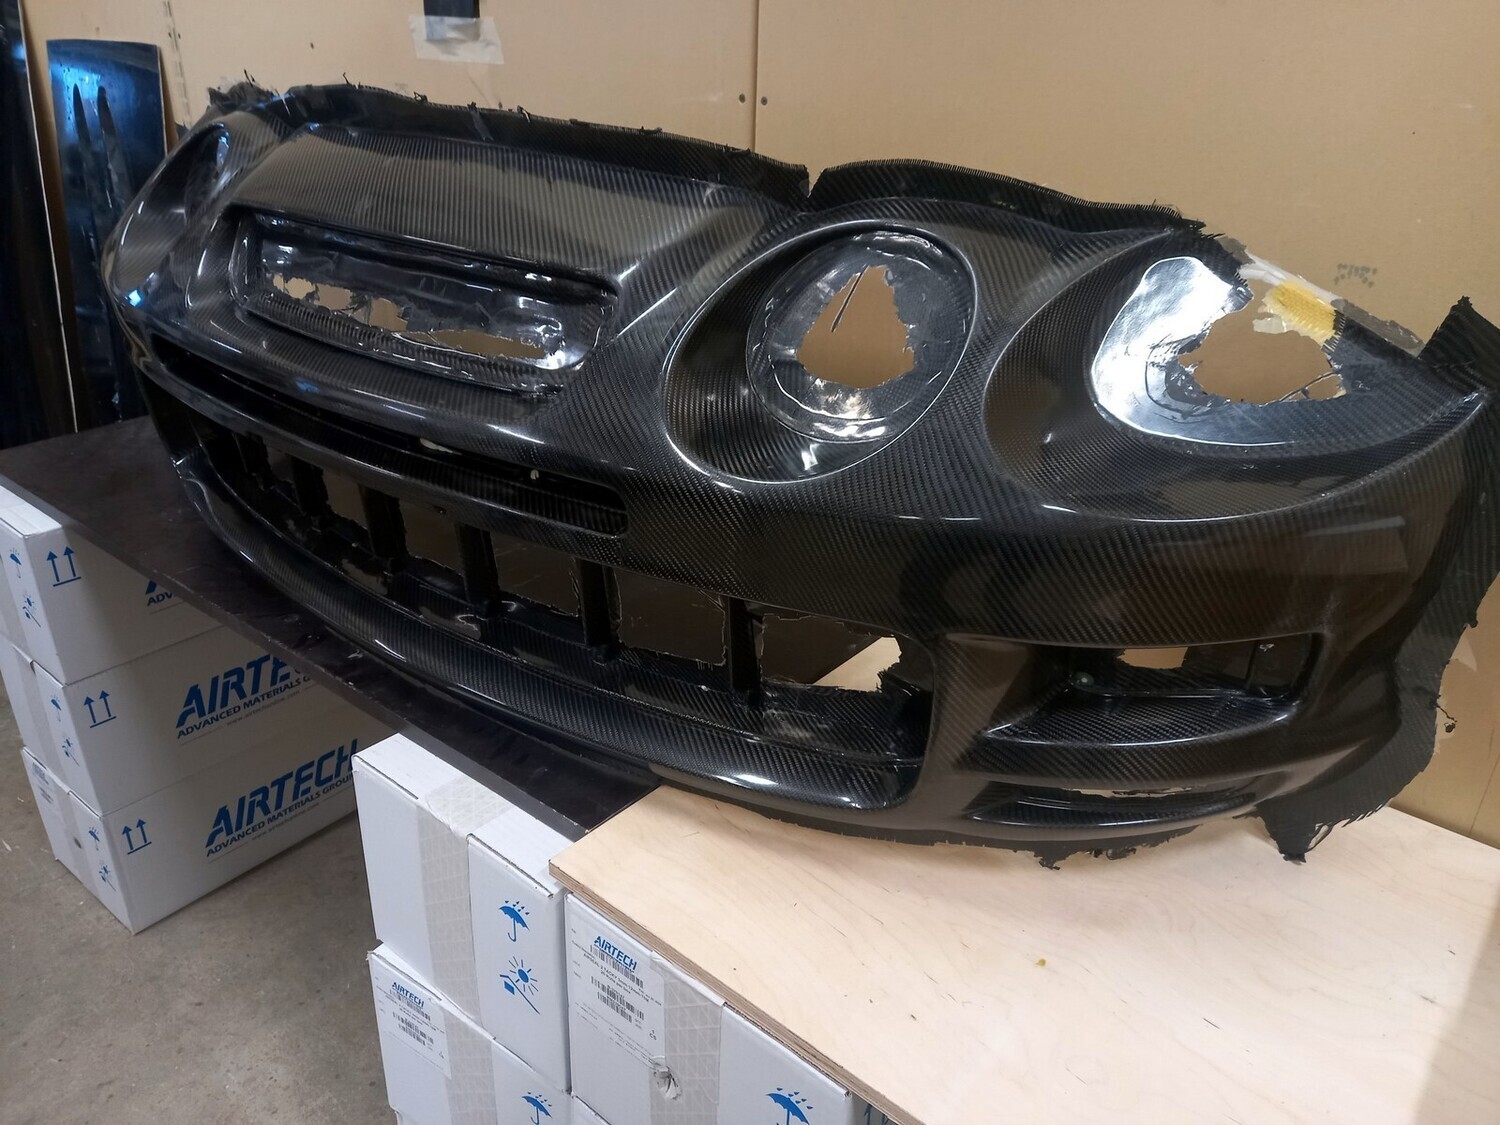 Front Bumper GT4 for Toyota Celica ST20 from Carbon Fiber